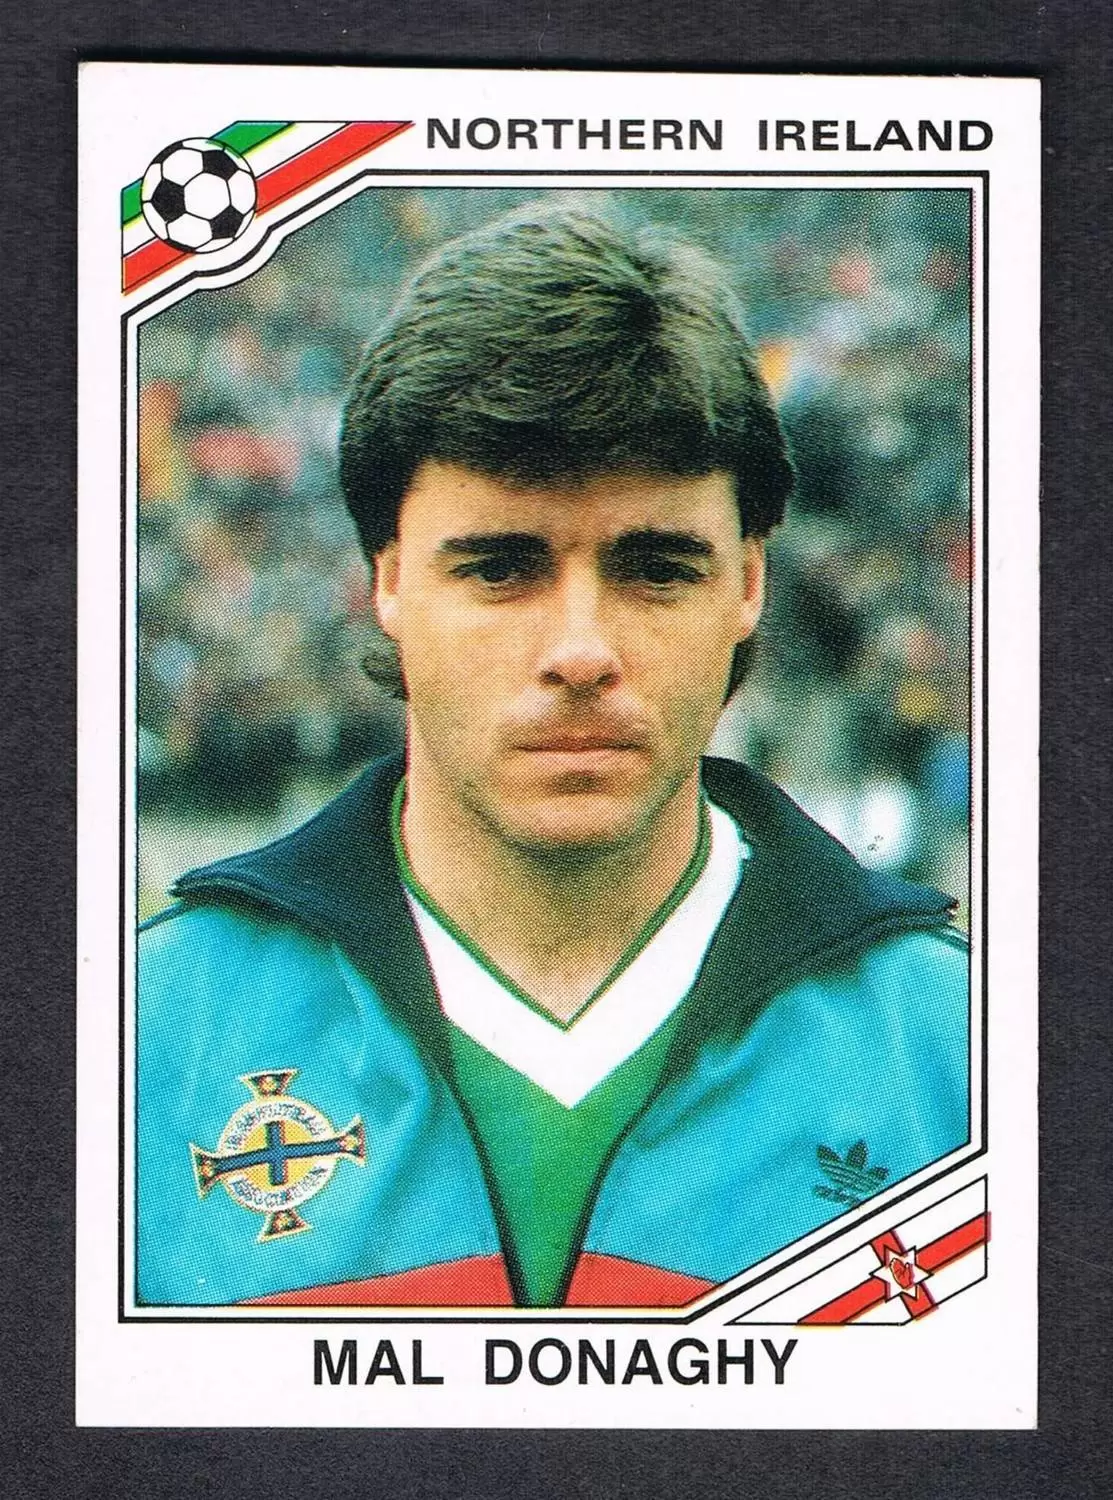 Mexico 86 World Cup - Mal Donaghy - Irlande du Nord